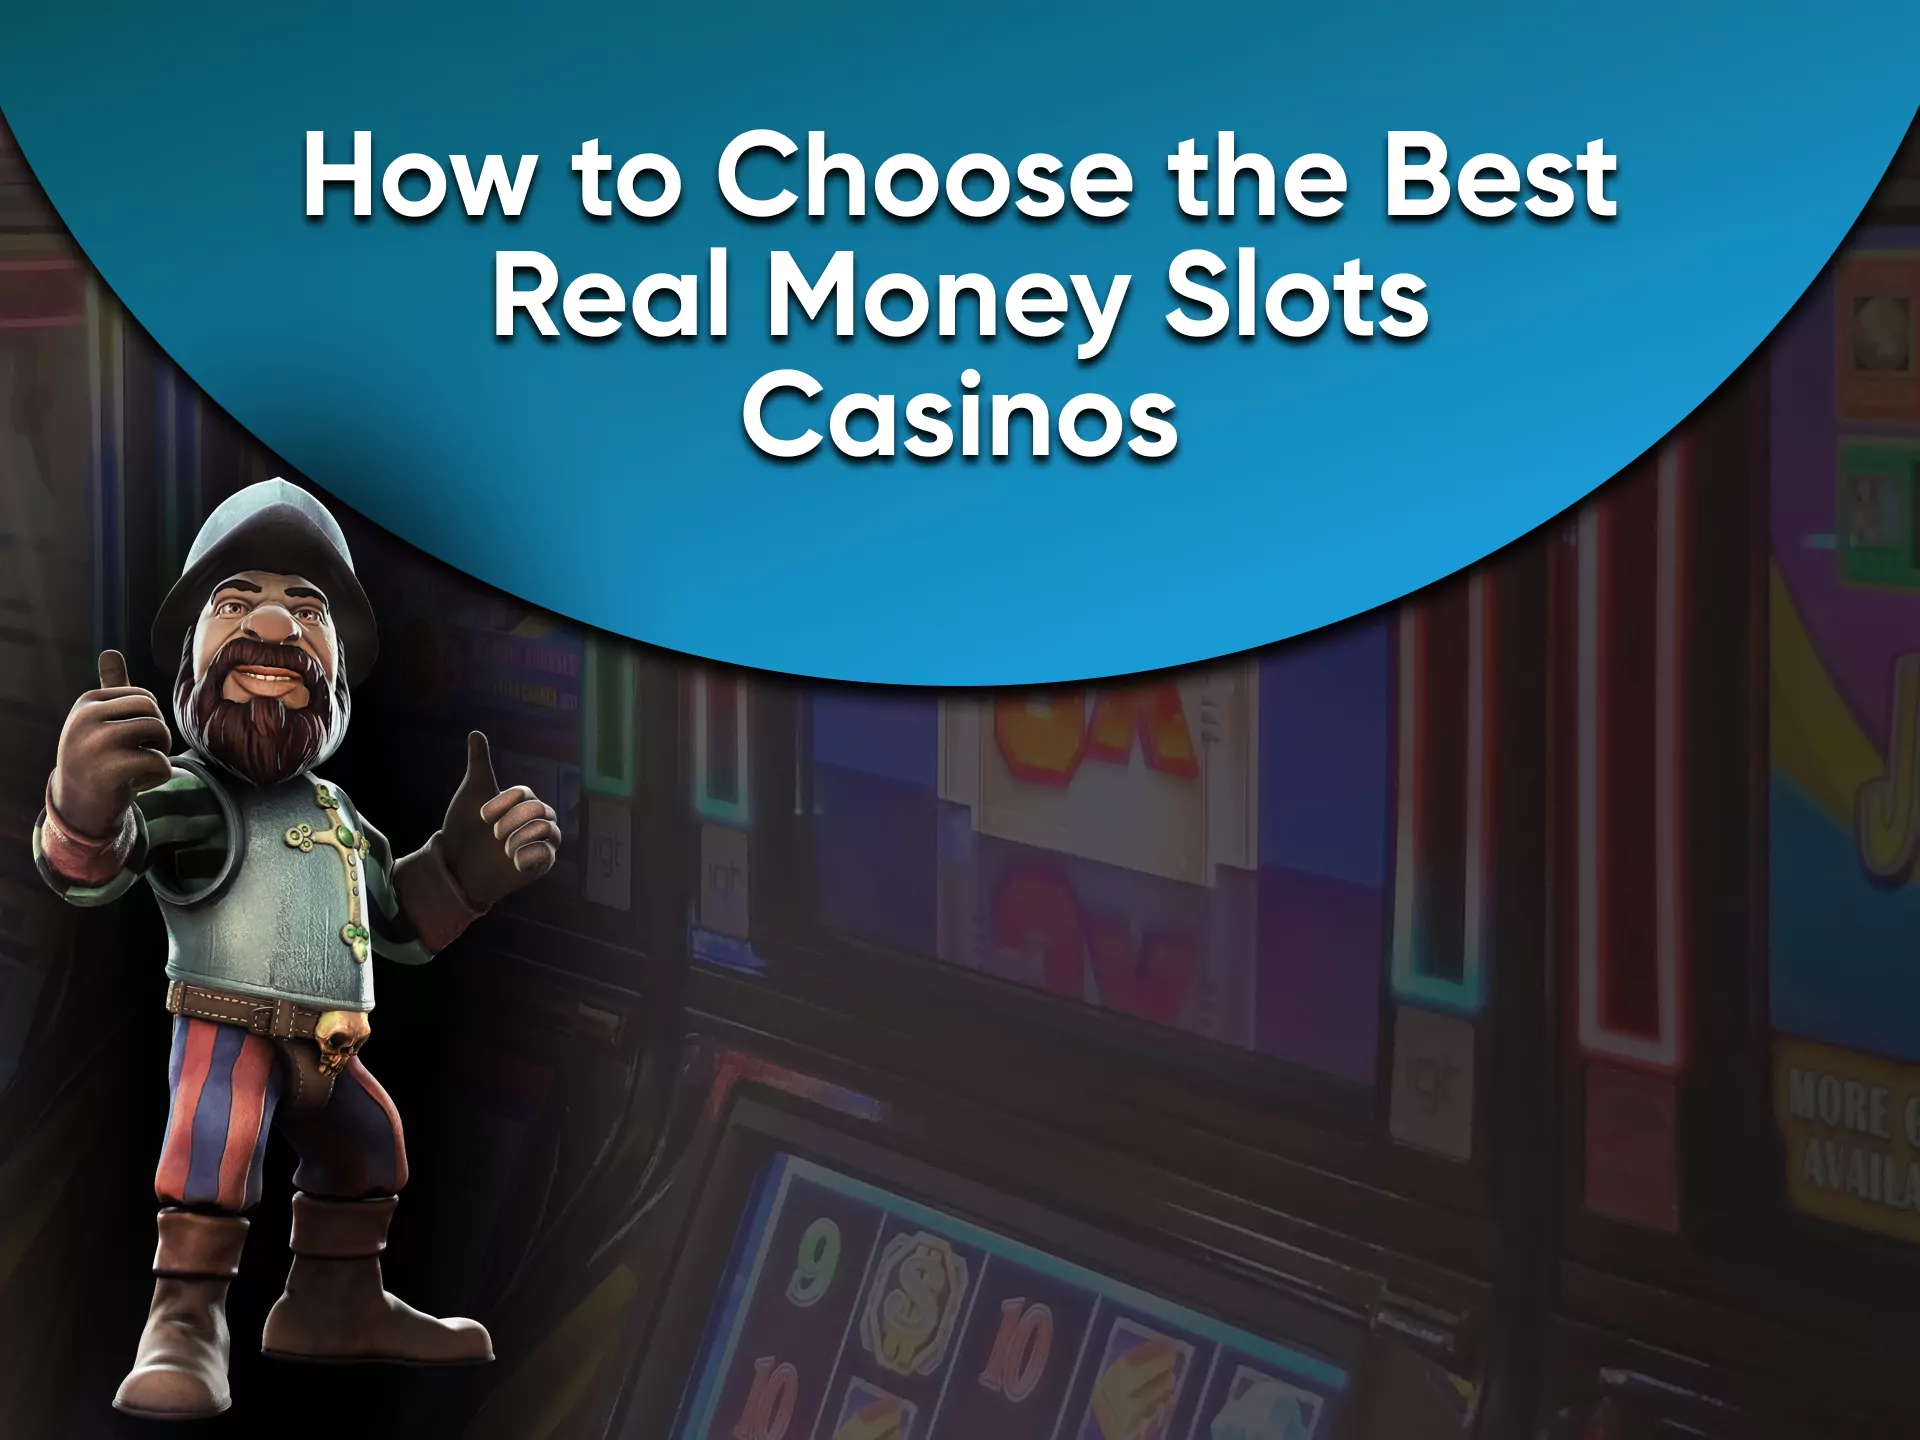 Make sure the service for playing slots online is reliable.